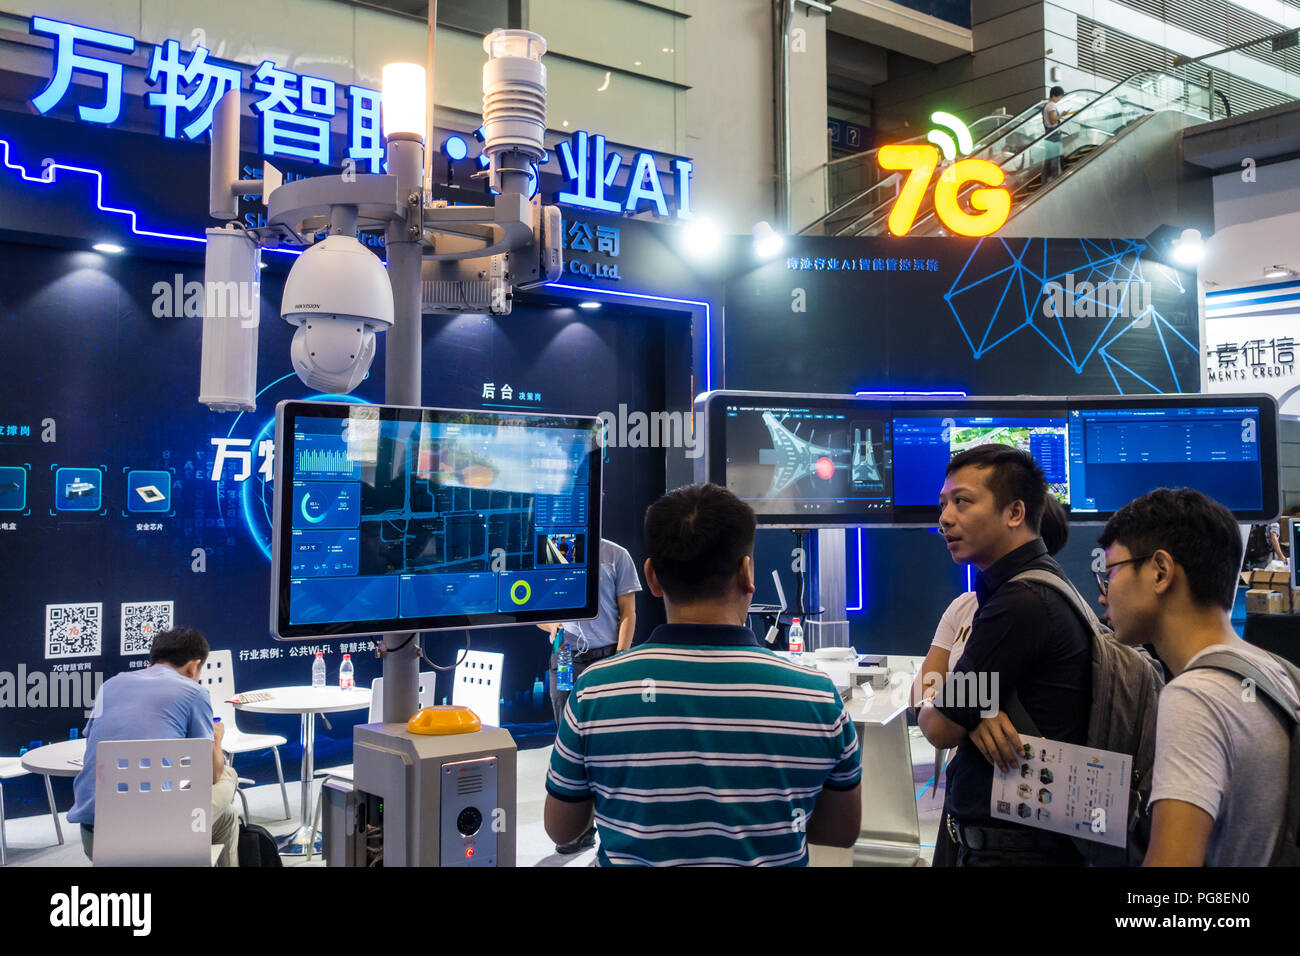 Surveillance and sensor smart city hi-tech monitoring technology, with people, at Smart City Expo 2018 in Shenzhen, China. Stock Photo